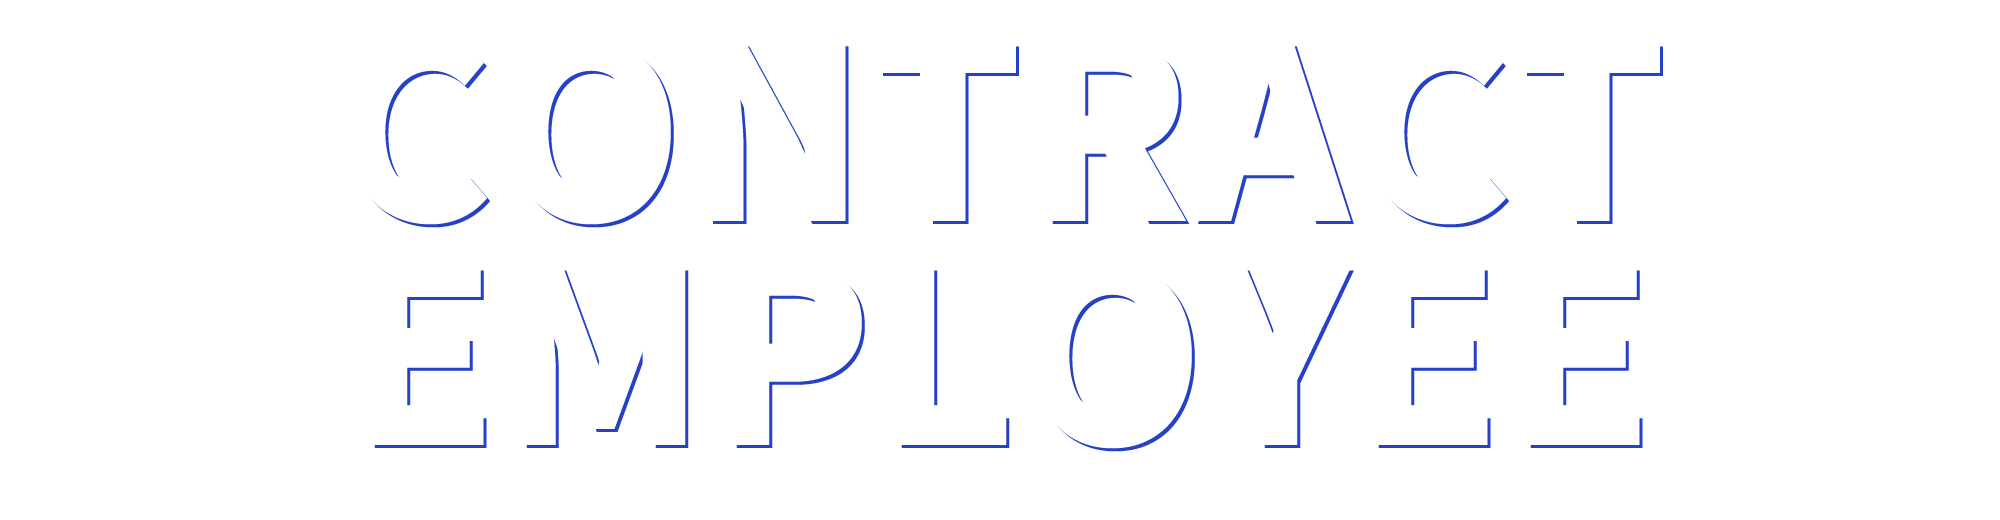 CONTRACT EMPLOYEE 契約社員採用情報